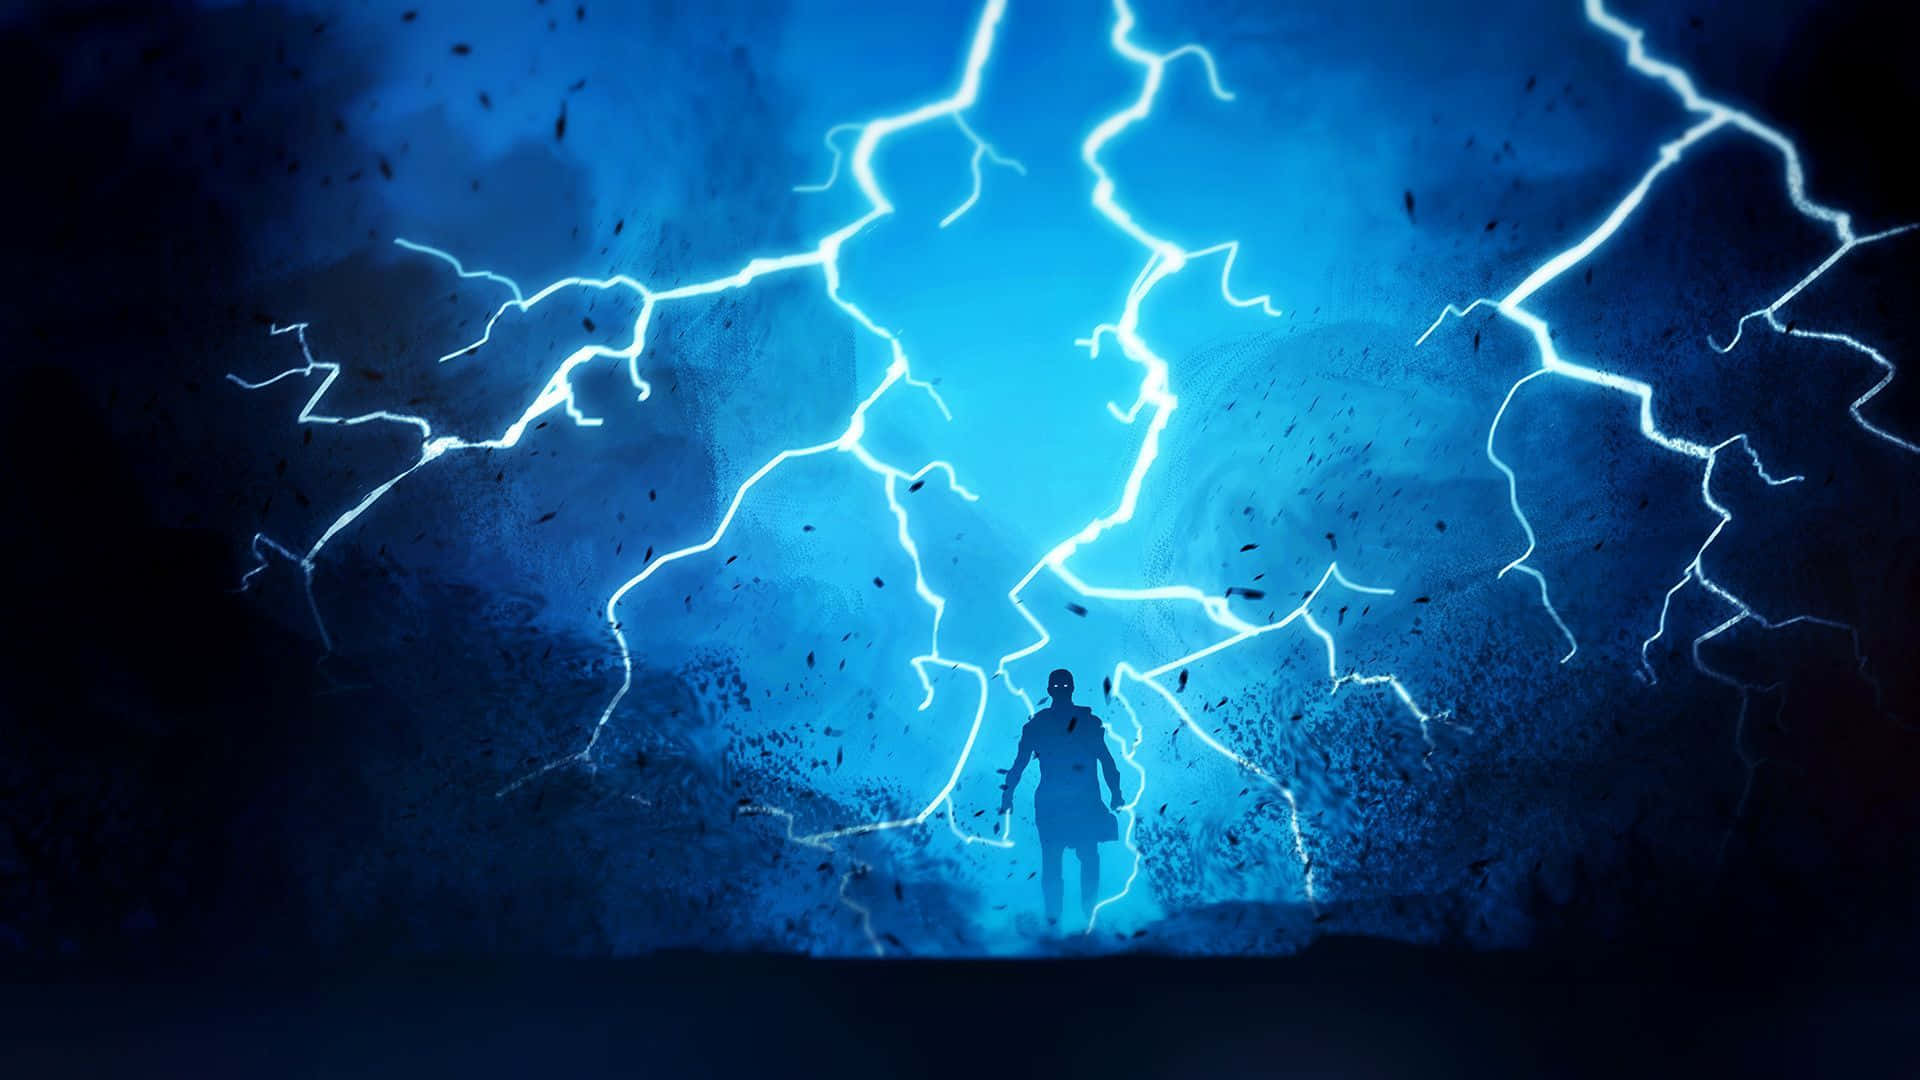 Cool Lightning Strikes Around A Person Wallpaper